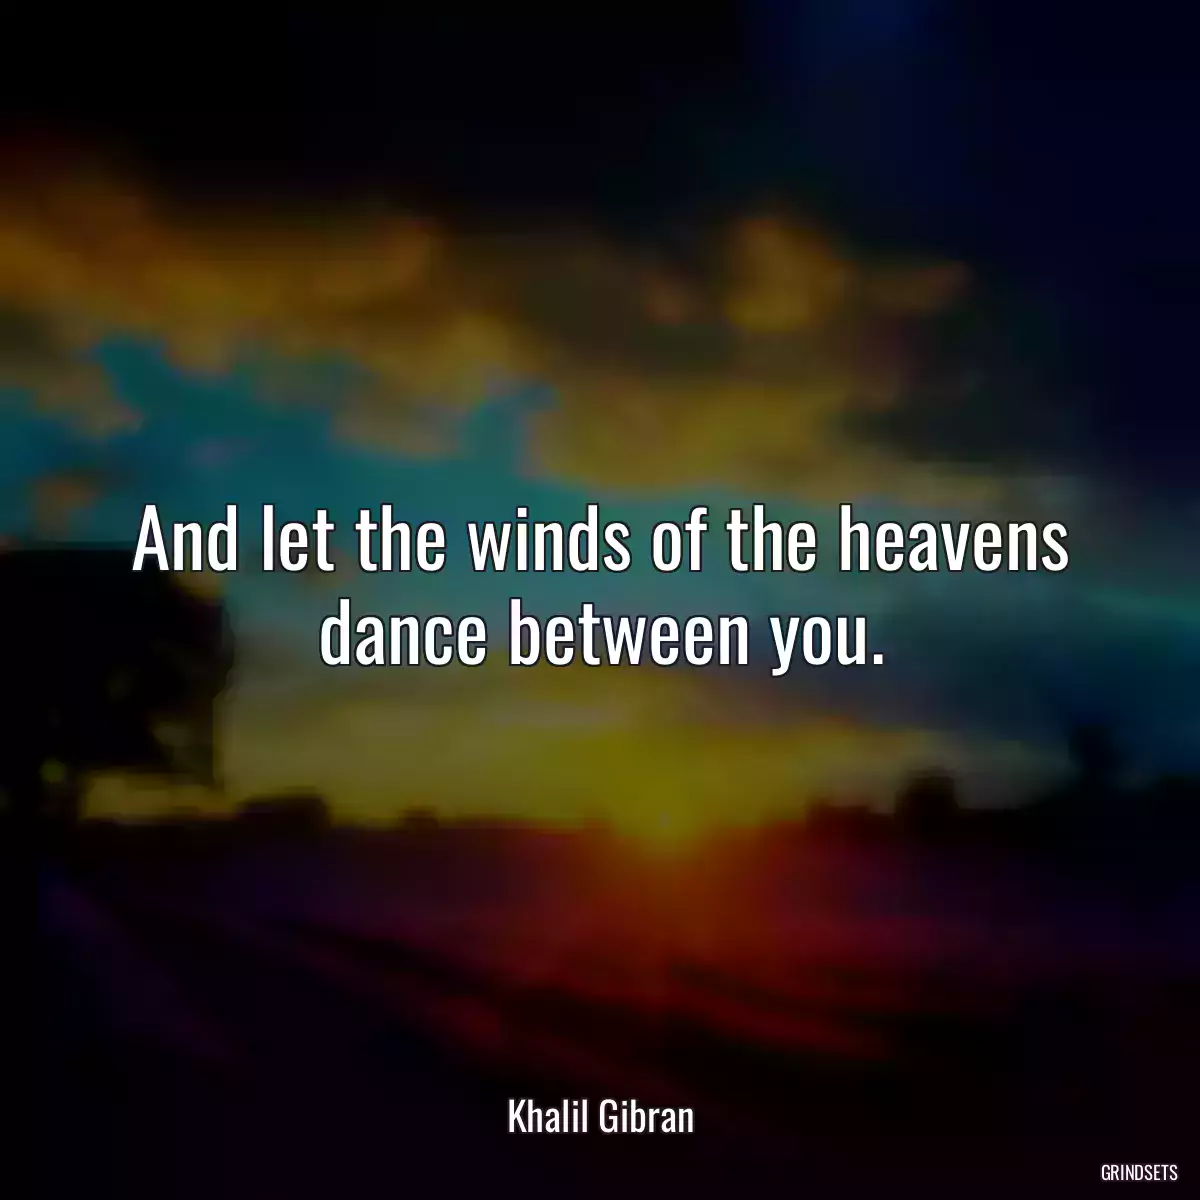 And let the winds of the heavens dance between you.